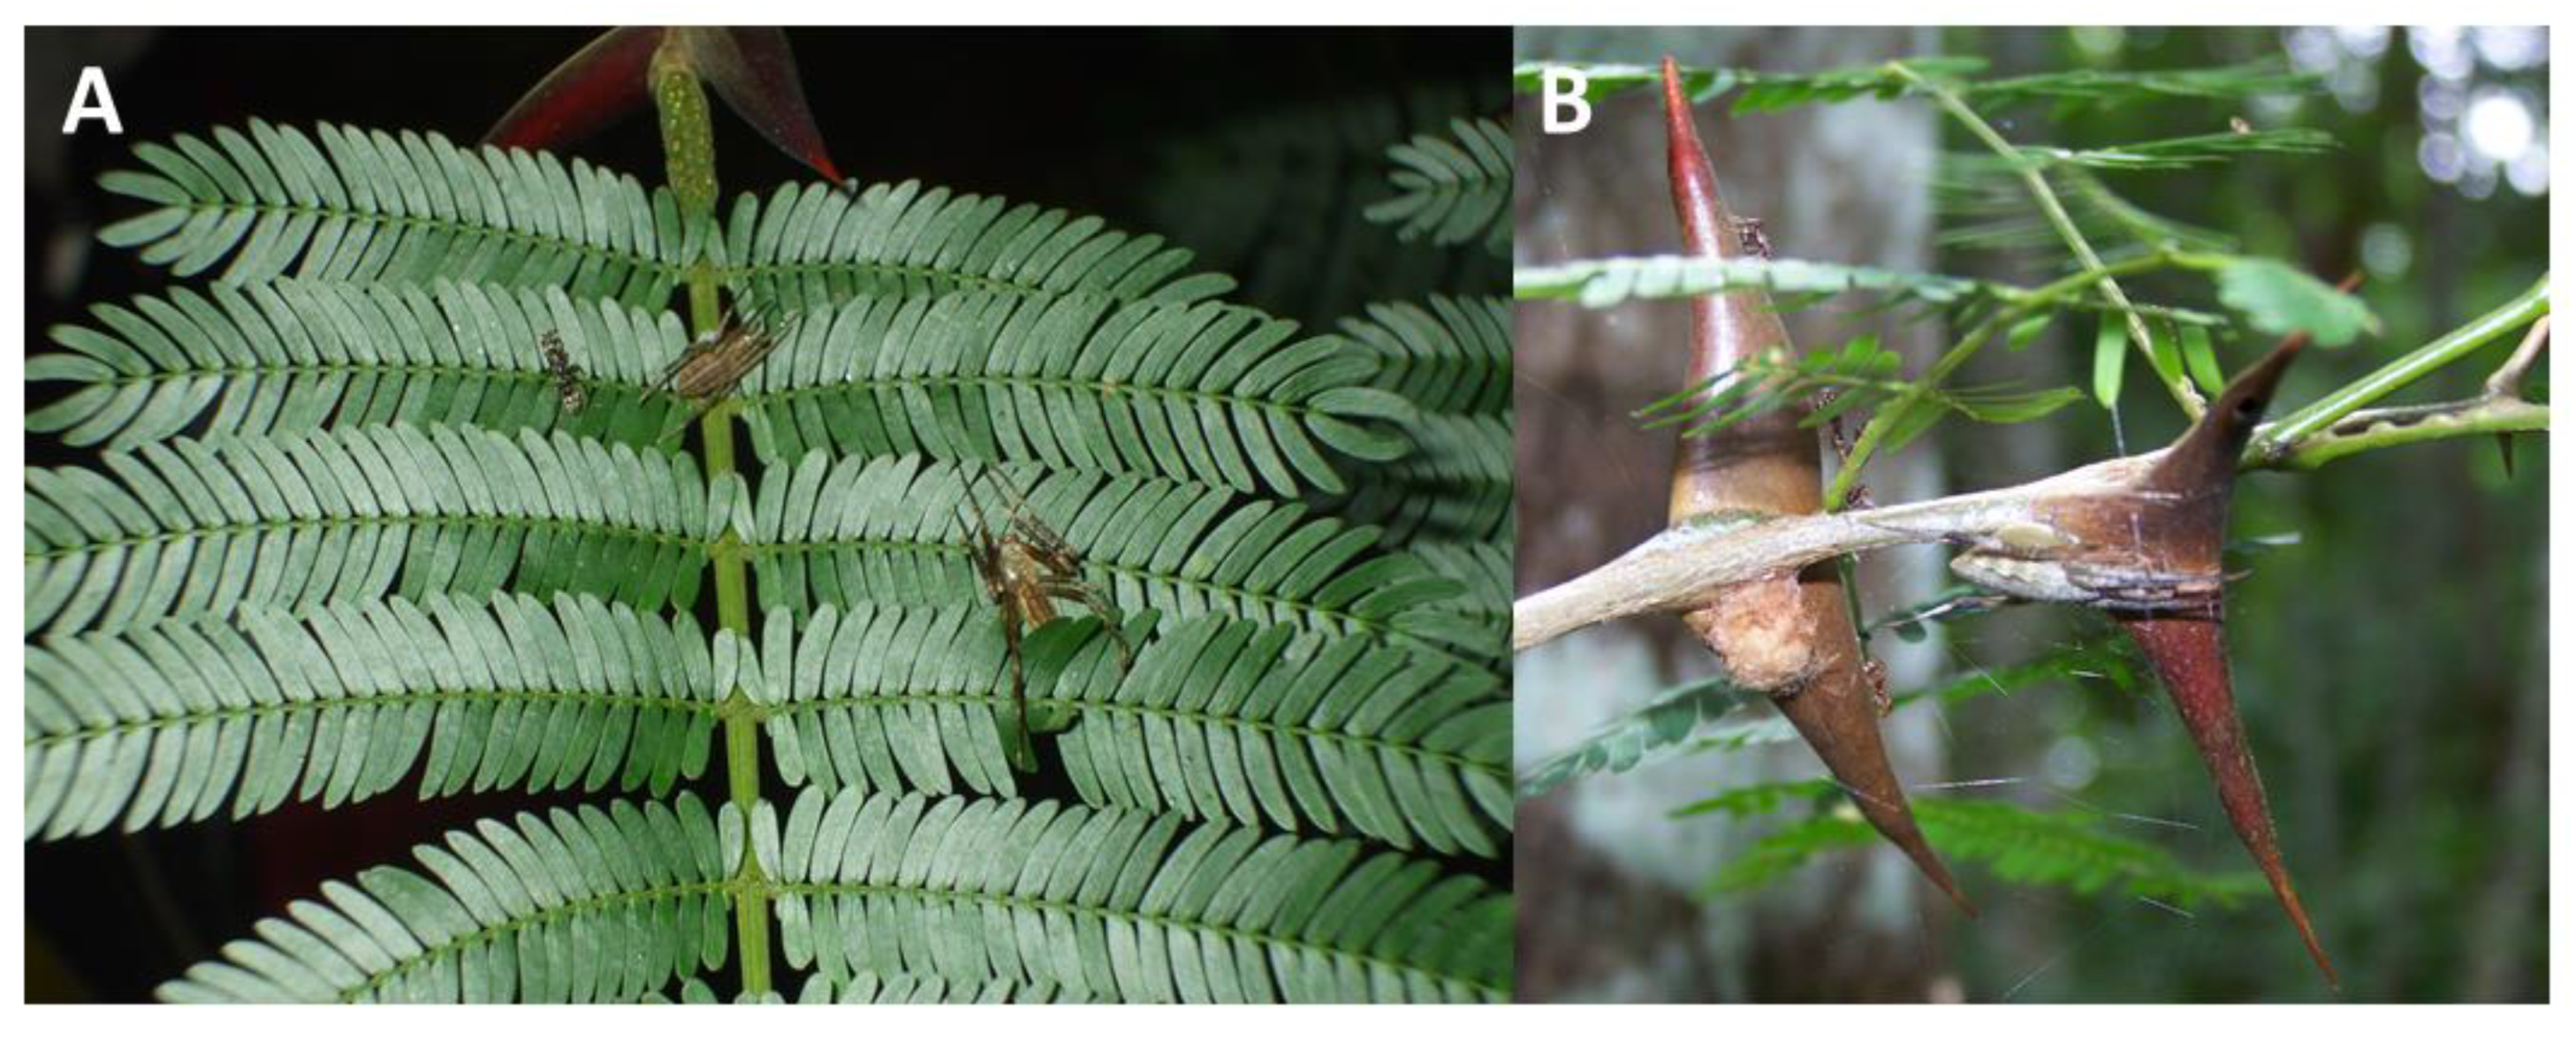 Insects | Free Full-Text | Host Plant Specificity in Web-Building Spiders